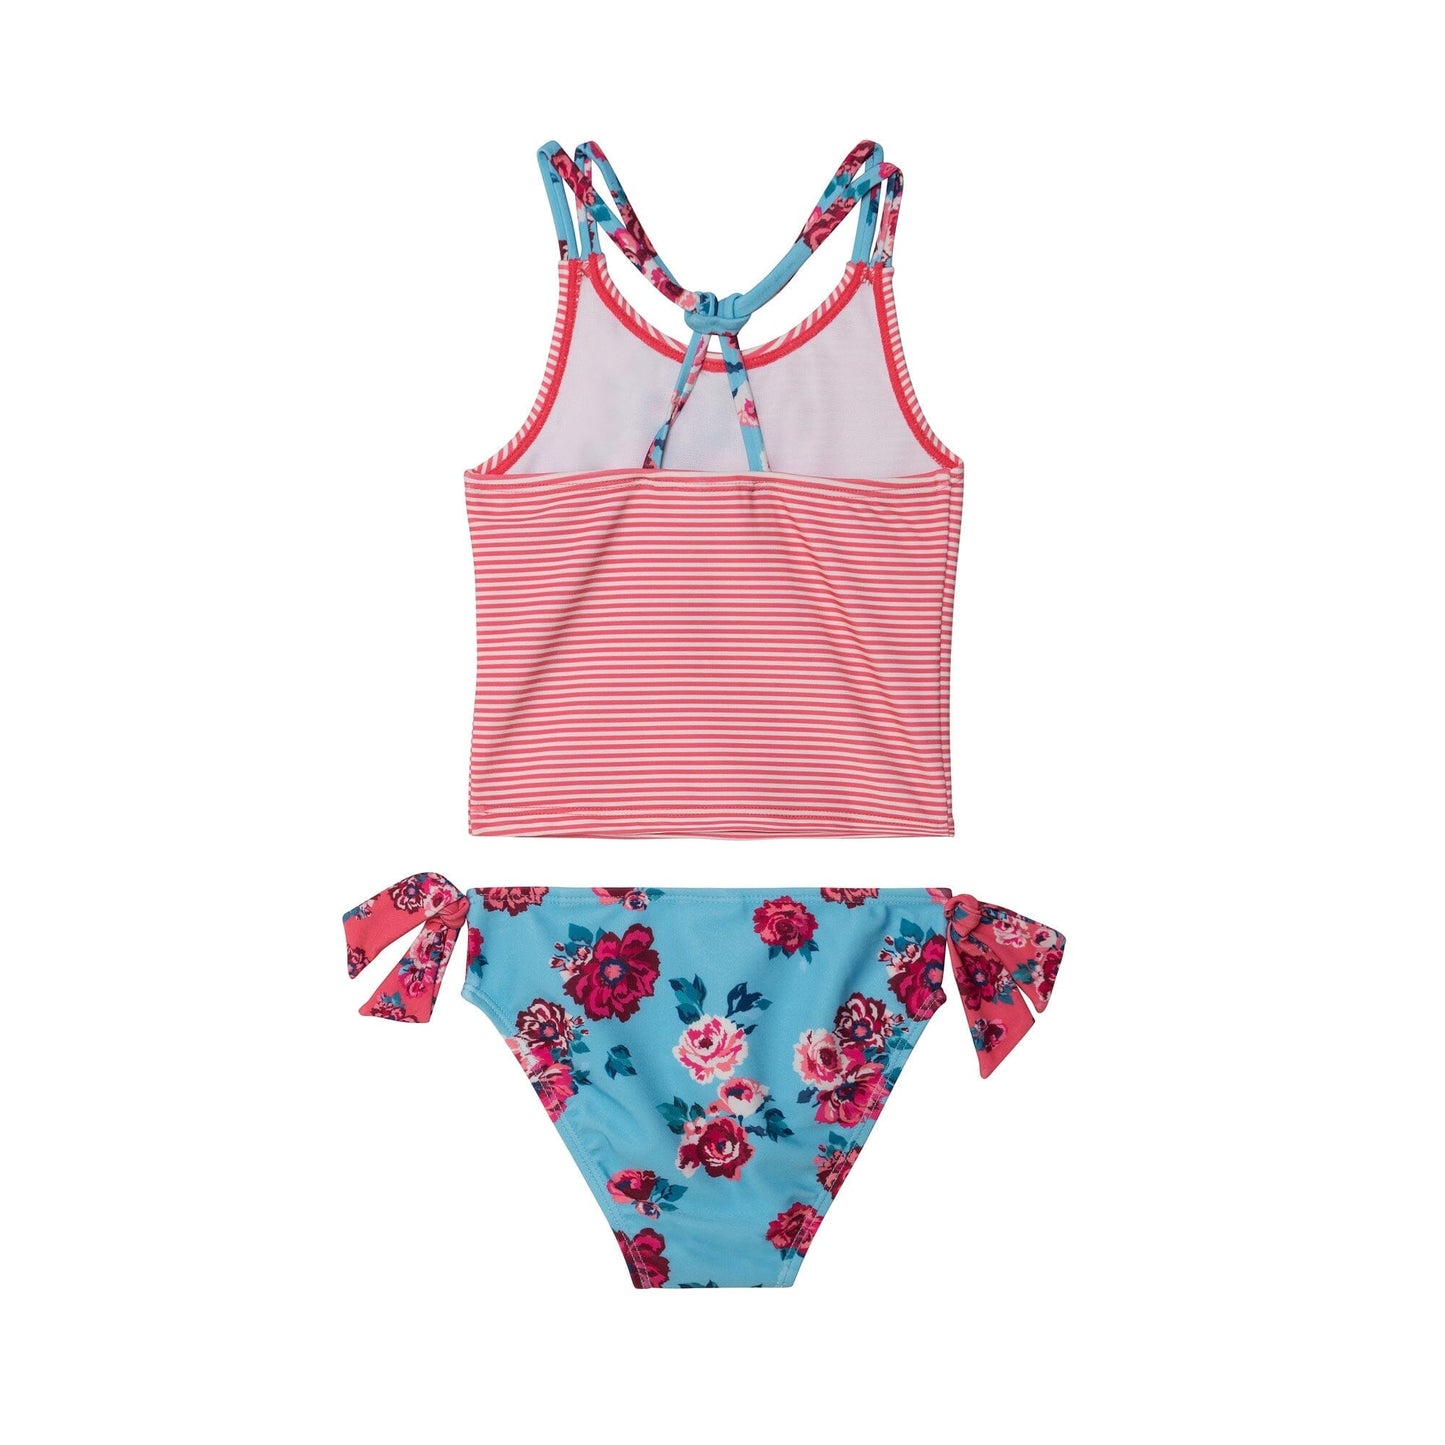 Printed Two Piece Swimsuit Pink Stripe & Blue Roses - E30NG12_000